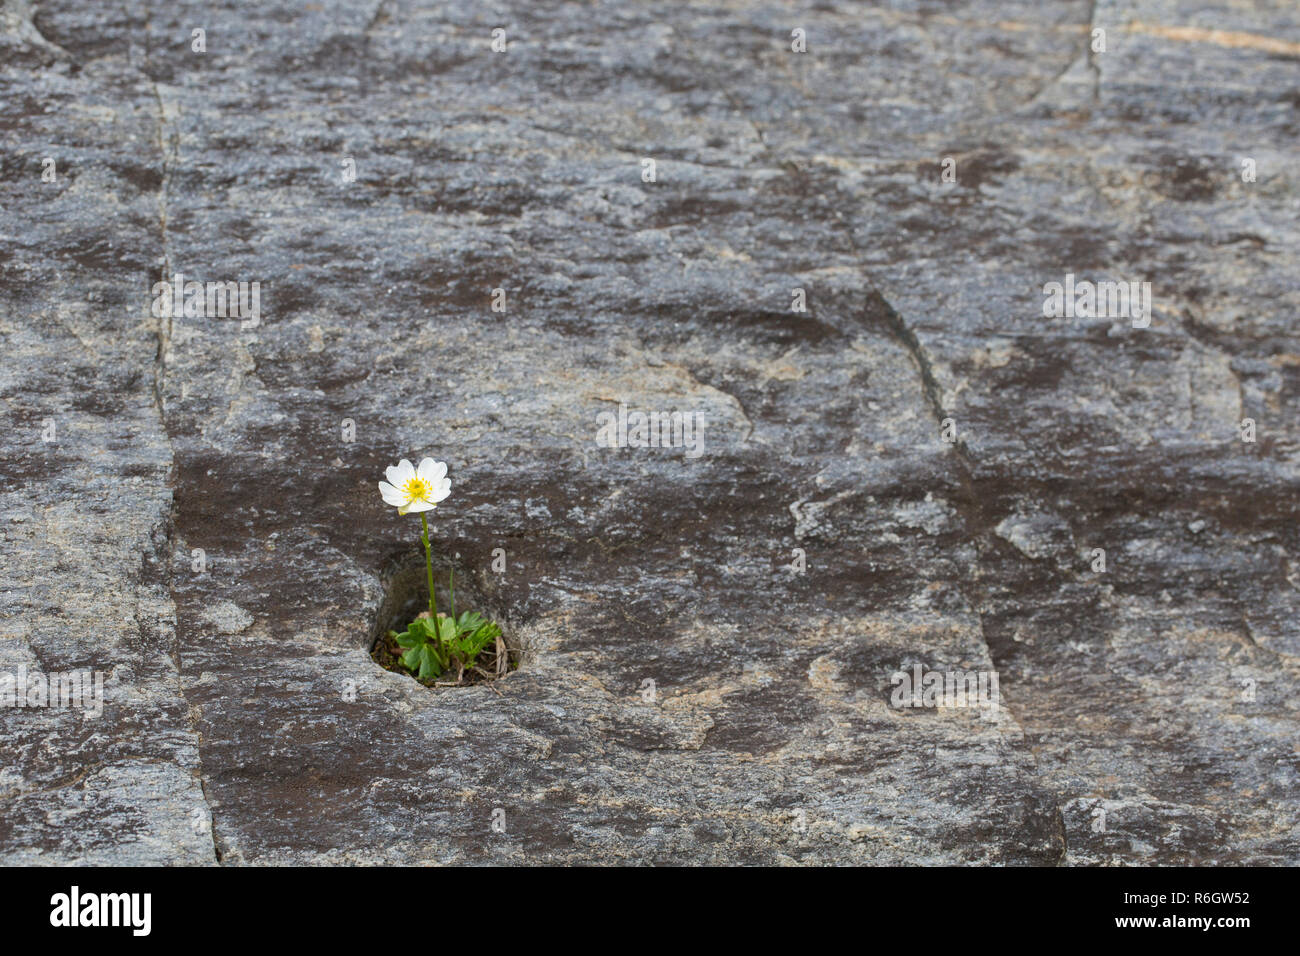 Alpine crowfoot / Alpine buttercup (Ranunculus alpestris) flower in rock face, native to the Alps, Pyrenees, Carpathian Mountains, and Apennines Stock Photo